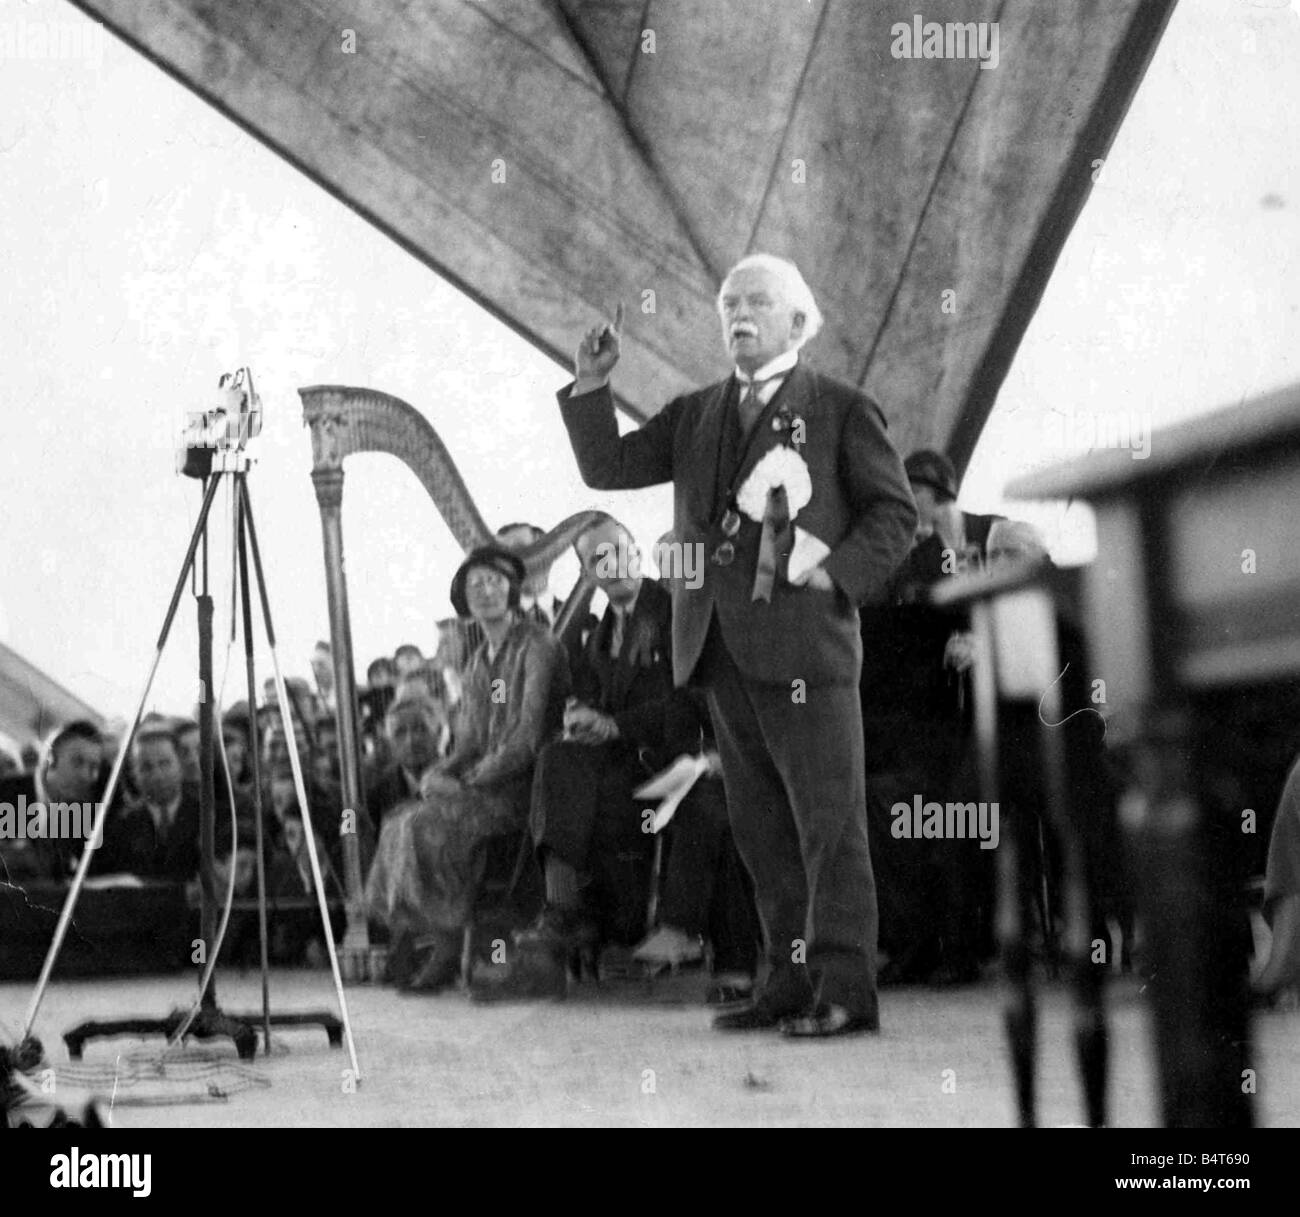 The Rt Hon David Lloyd George at the Urdd Gobaith Eisteddfod at Machynlleth  addressing the huge crowd gathered in the tent his speech was broadcast  August 1937 Stock Photo - Alamy